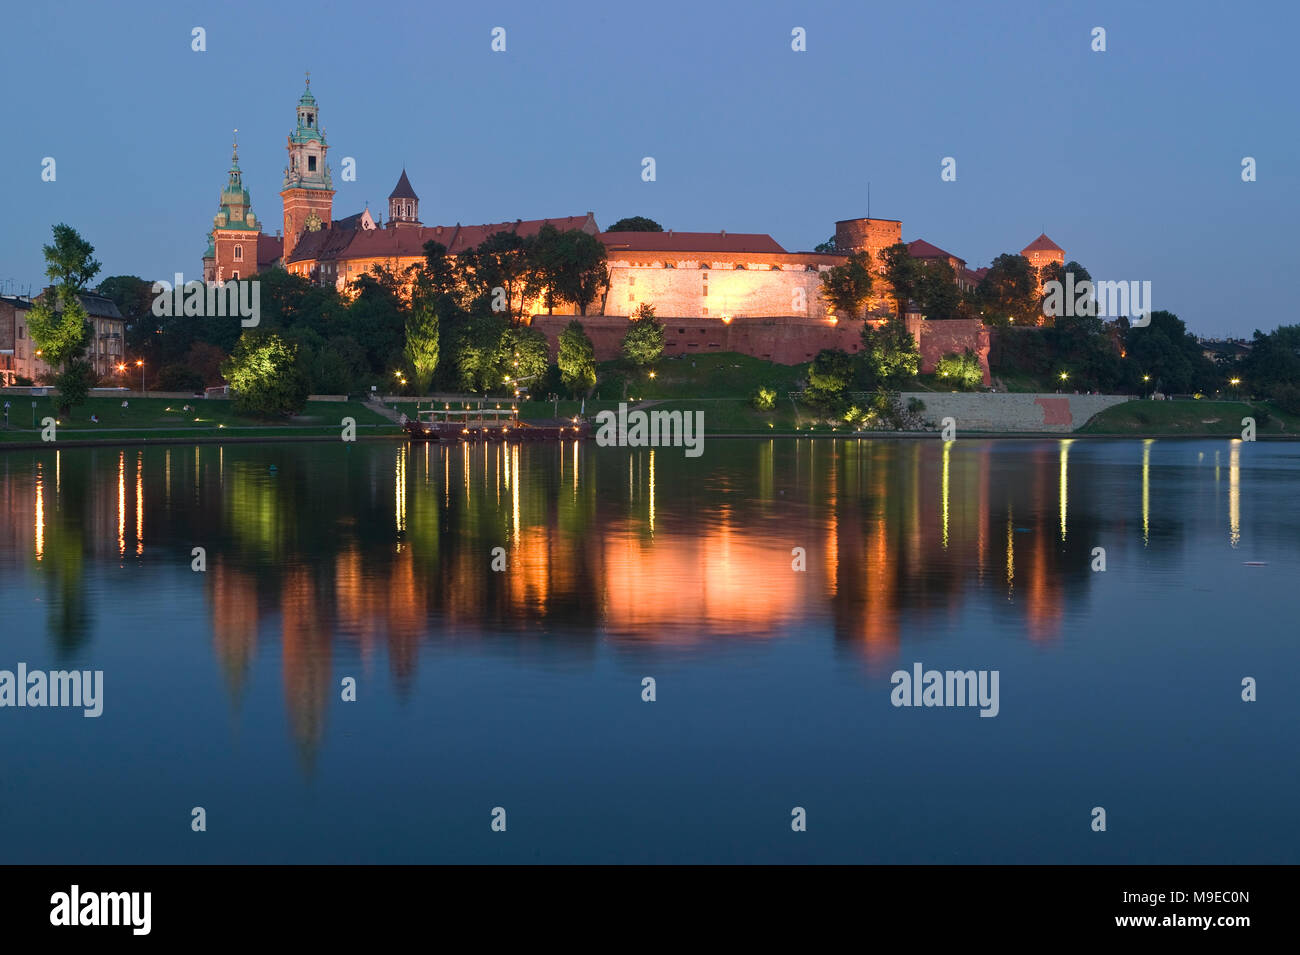 Wawel Hill with Royal Castle and Cathedral across the Vistula River, Krakow, Poland Stock Photo